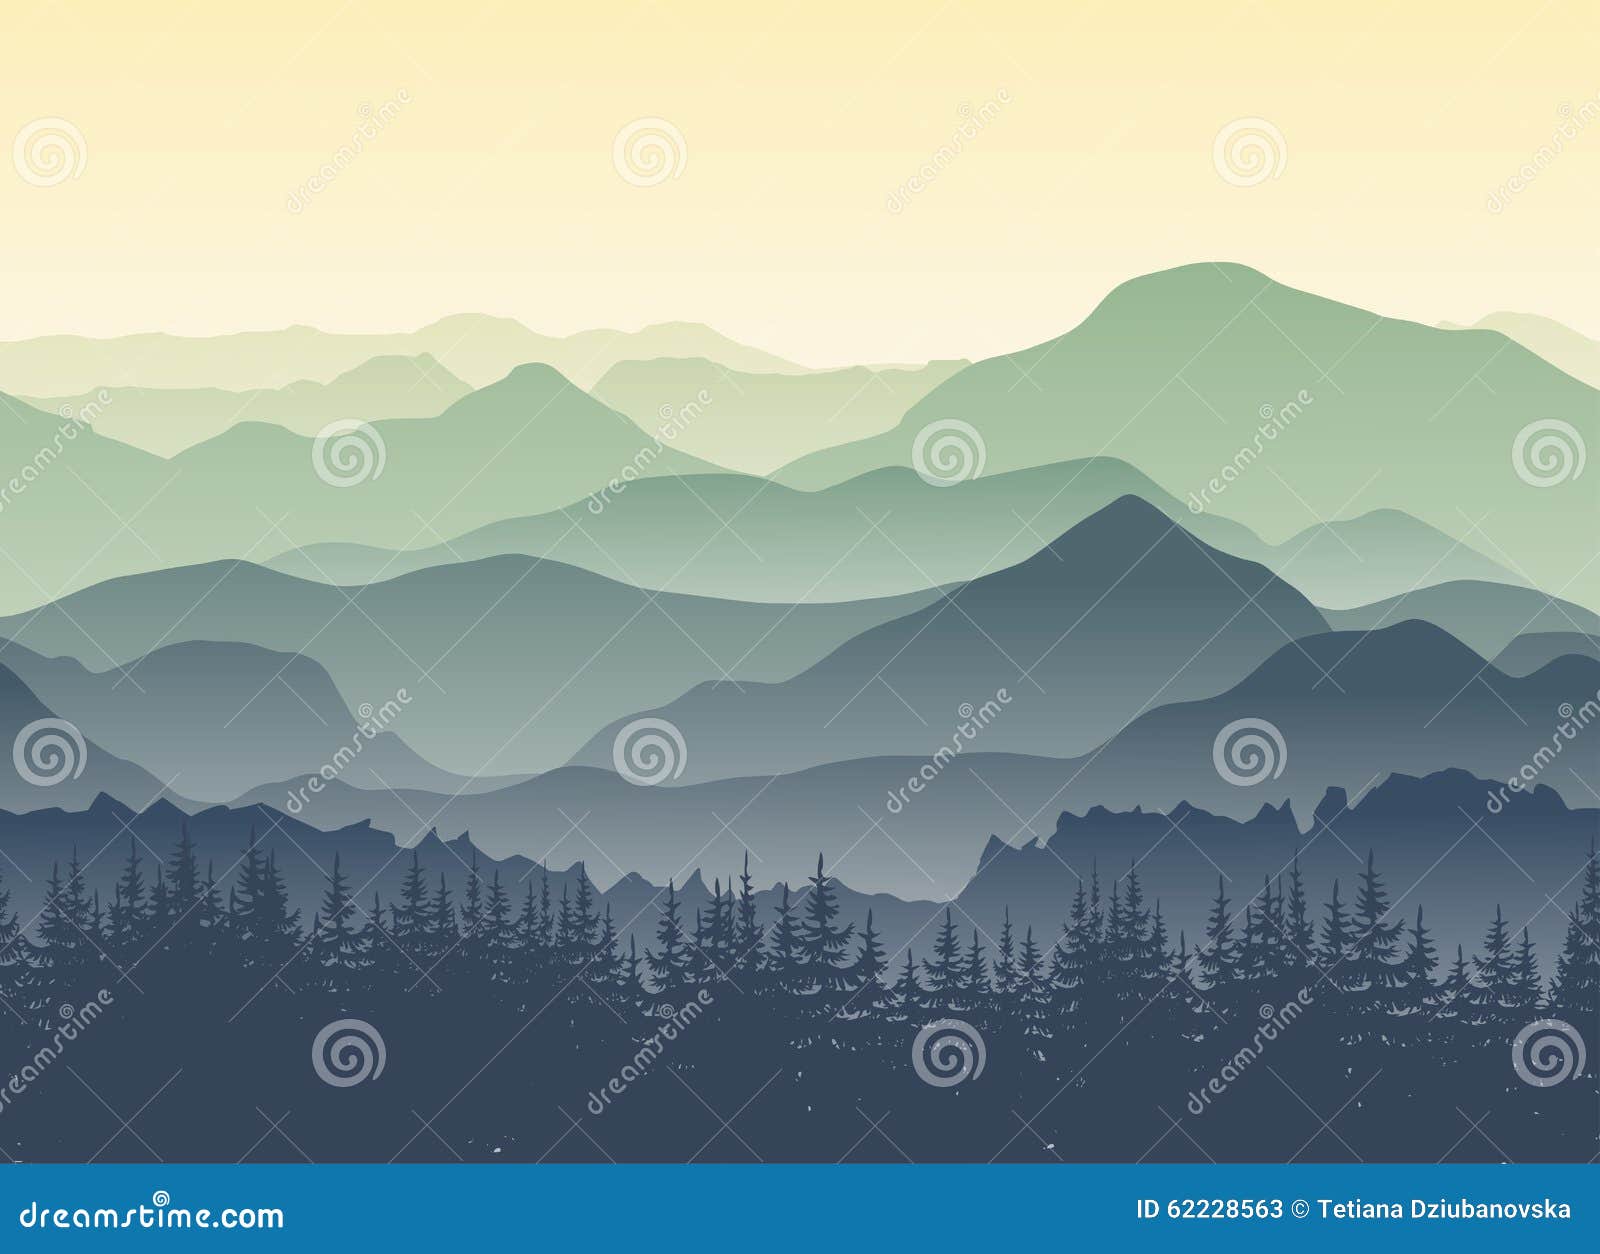 green mountains landscape in summer. seamless background..